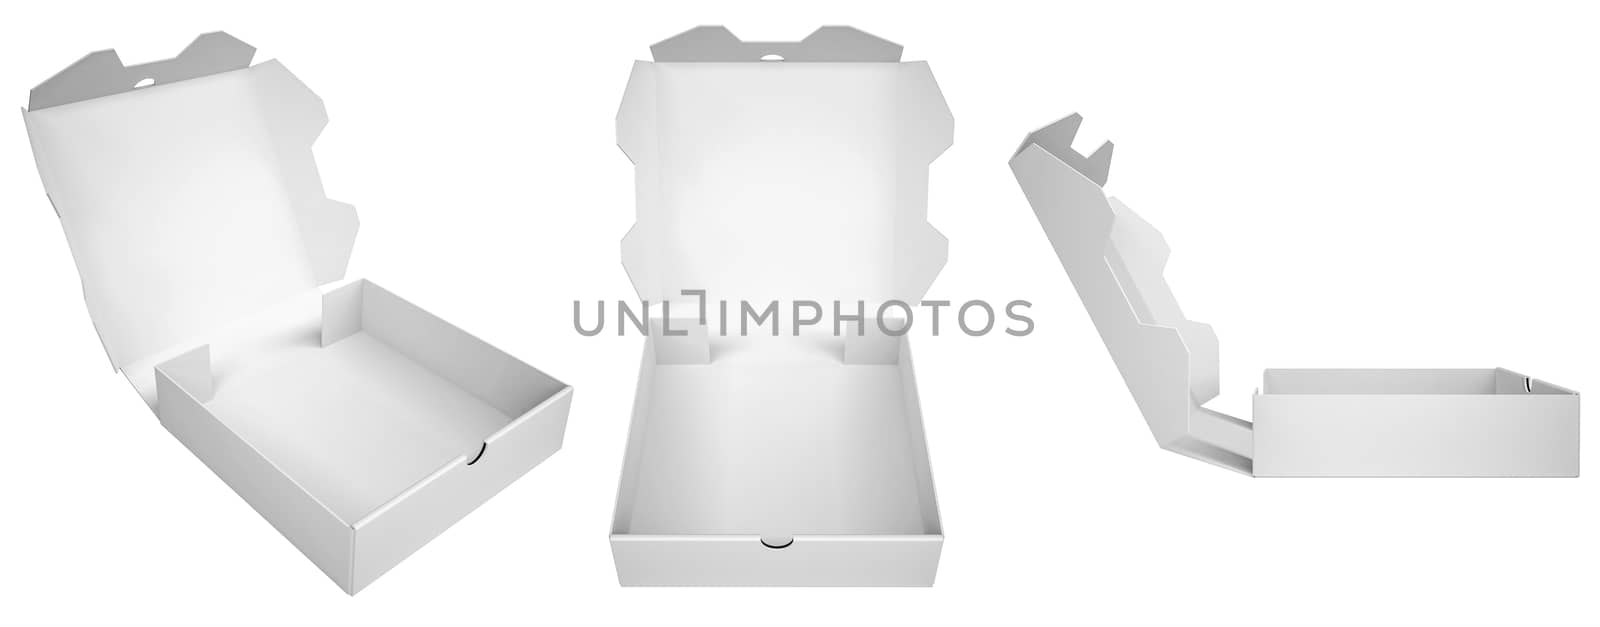 Cardboard boxes for pizza, isolated on white background. 3d illustration